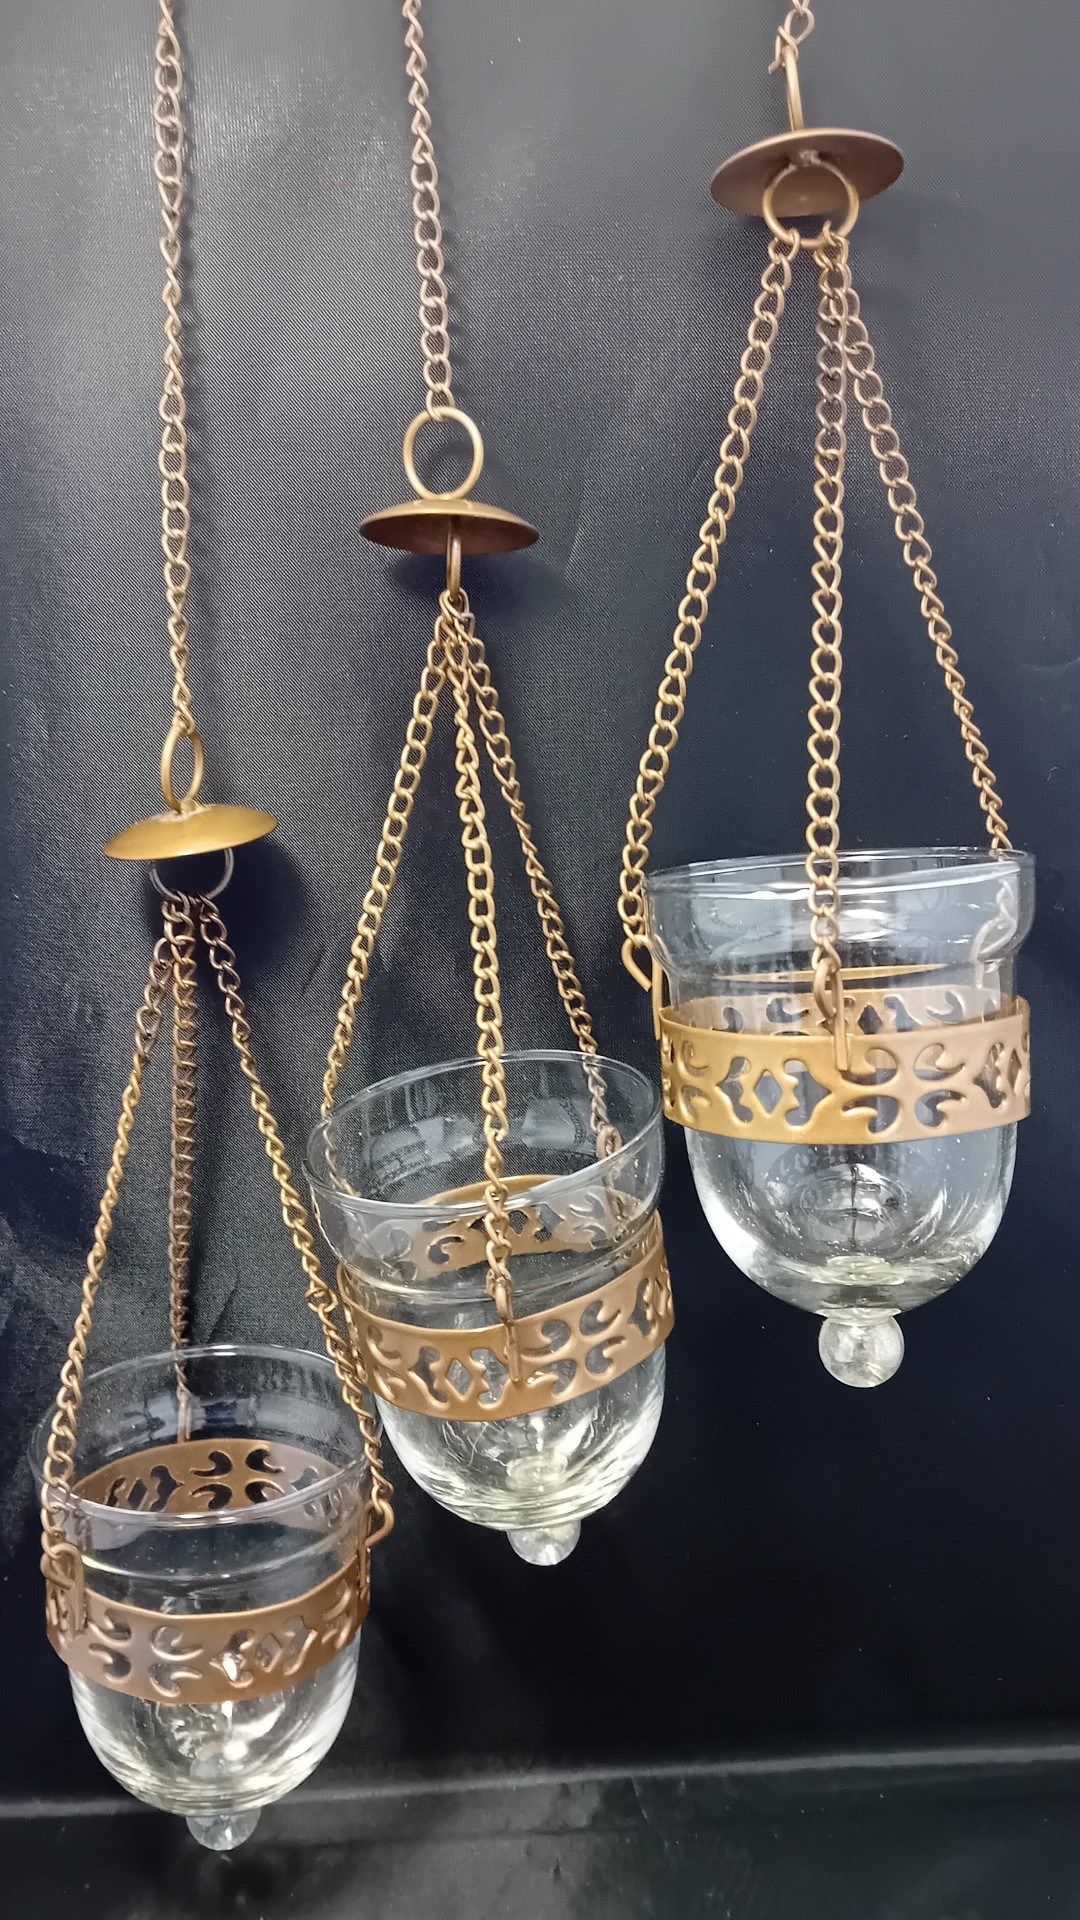 Set of 3 Hanging Candle Holders